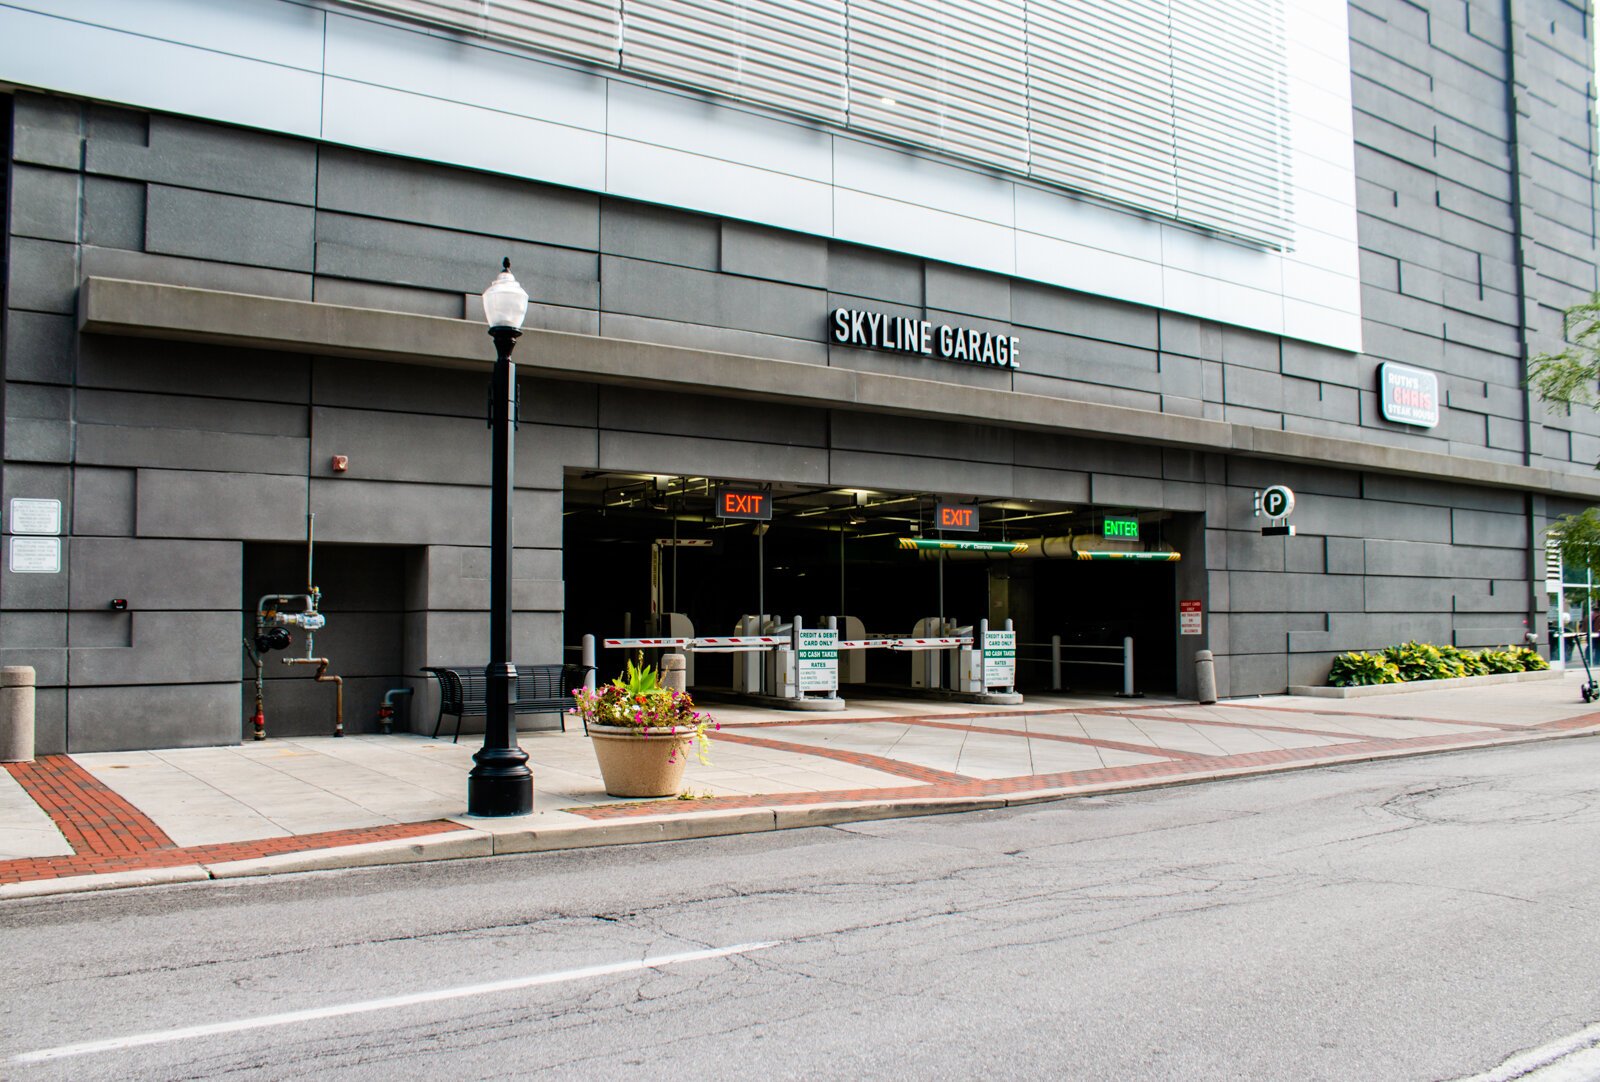 The Skyline Garage at 926 S. Harrison St. offers parking for business and residential tenants in the building, as well as public parking.